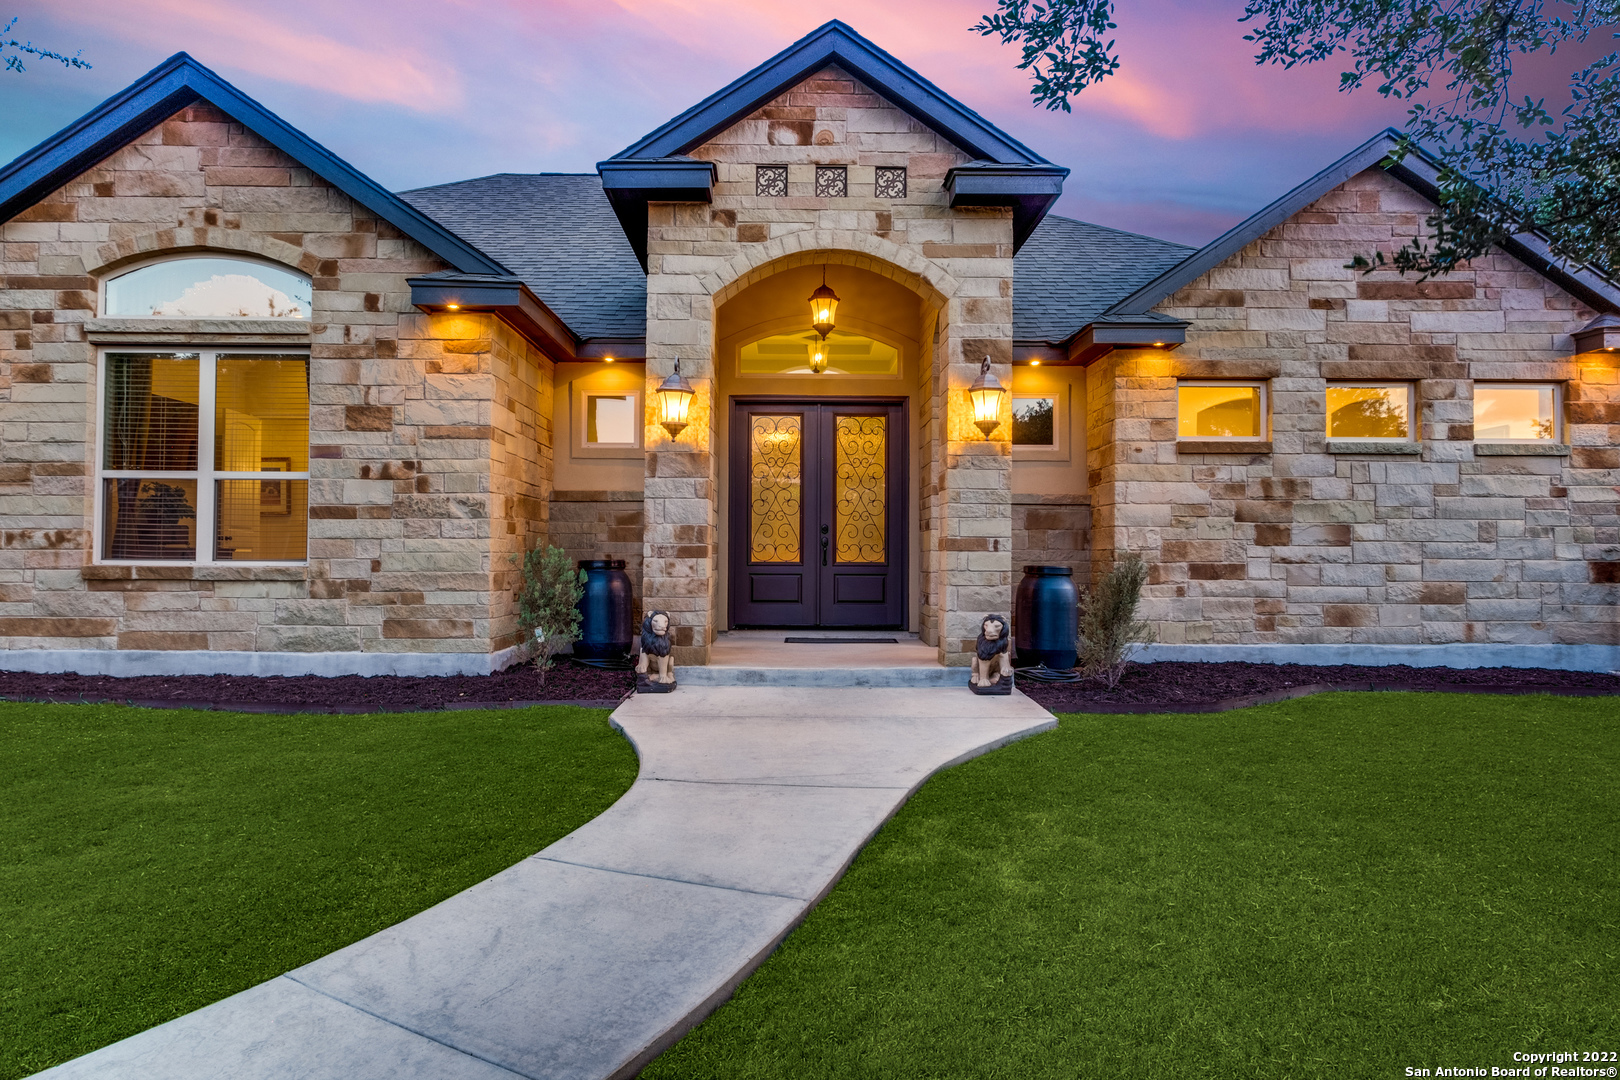 This marvelous, single-story home is situated on a generous-sized lot accessed by a private gated entrance. Upon arrival, a dedicated driveway is surrounded by mature shade trees and a well-manicured lawn. The stone and stucco exterior adds to the home's unique charm. Inside, neutral tile flooring is highlighted by elevated ceilings, picture windows, and more. Off the entry, a dedicated office space can be found, perfect for privacy. In the common areas, an open floor plan offers to entertain at ease. The living space showcases a built-in, wood-crafted entertainment center, perfect for movie nights, and provides stylish storage. Tray ceilings and views of the tree-shaded backyard complete this area. Flowing into the gourmet kitchen, the household chef will appreciate the espresso-colored cabinetry, contrasting granite counters, stainless steel appliances, stylish backsplash, and custom island with seating. Enjoy elegant dining in the grand living space with ample room for a bar or china cabinet. Retreat to the luxurious-sized primary suite with private access to the outdoors. The en suite offers dual sinks, a sit-down vanity, jetted tub, and a walk-in shower. Two secondary bedrooms and a full bath complete the interior. Outside, enjoy al fresco dining with a fireplace overlooking the extensive backyard, perfect for making this an oasis of your own. With proximity to Blanco Road, 281, eateries, and more, come view this stunning home today.